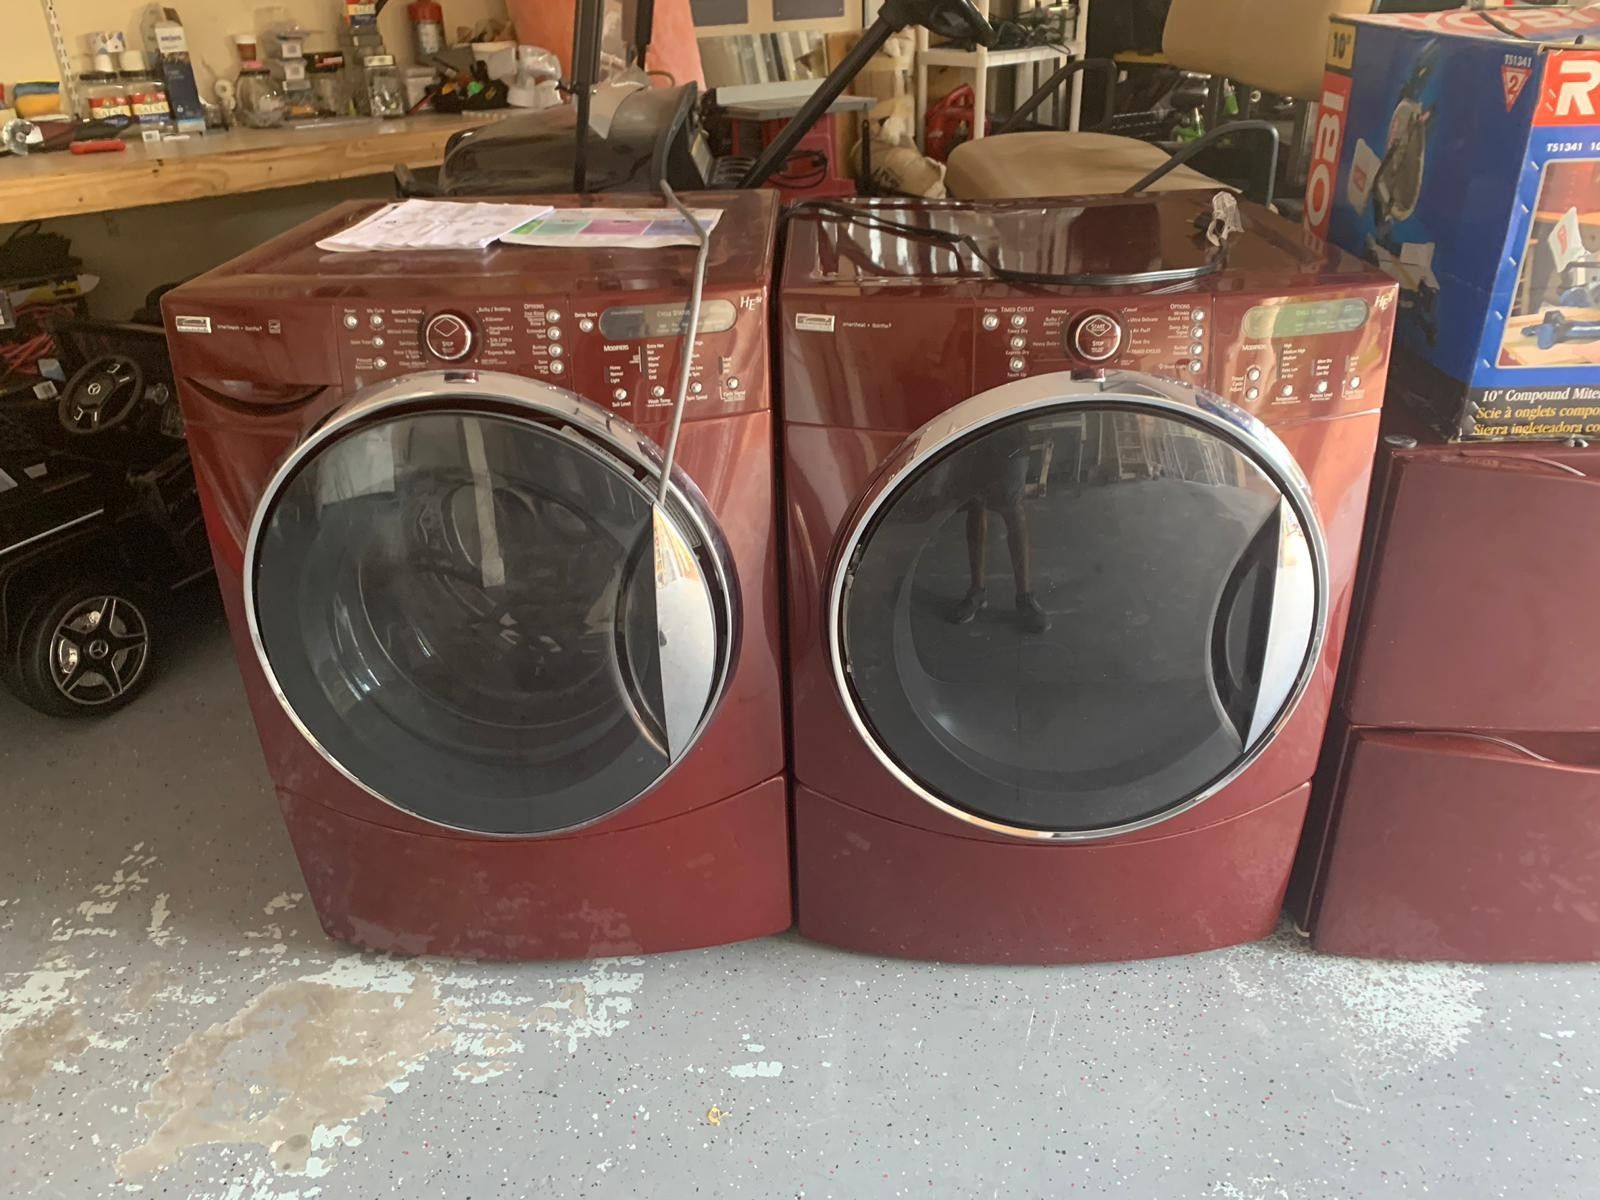 Kenmore washer and dryer combo in great conditions with pedetals but the washer moves a lot